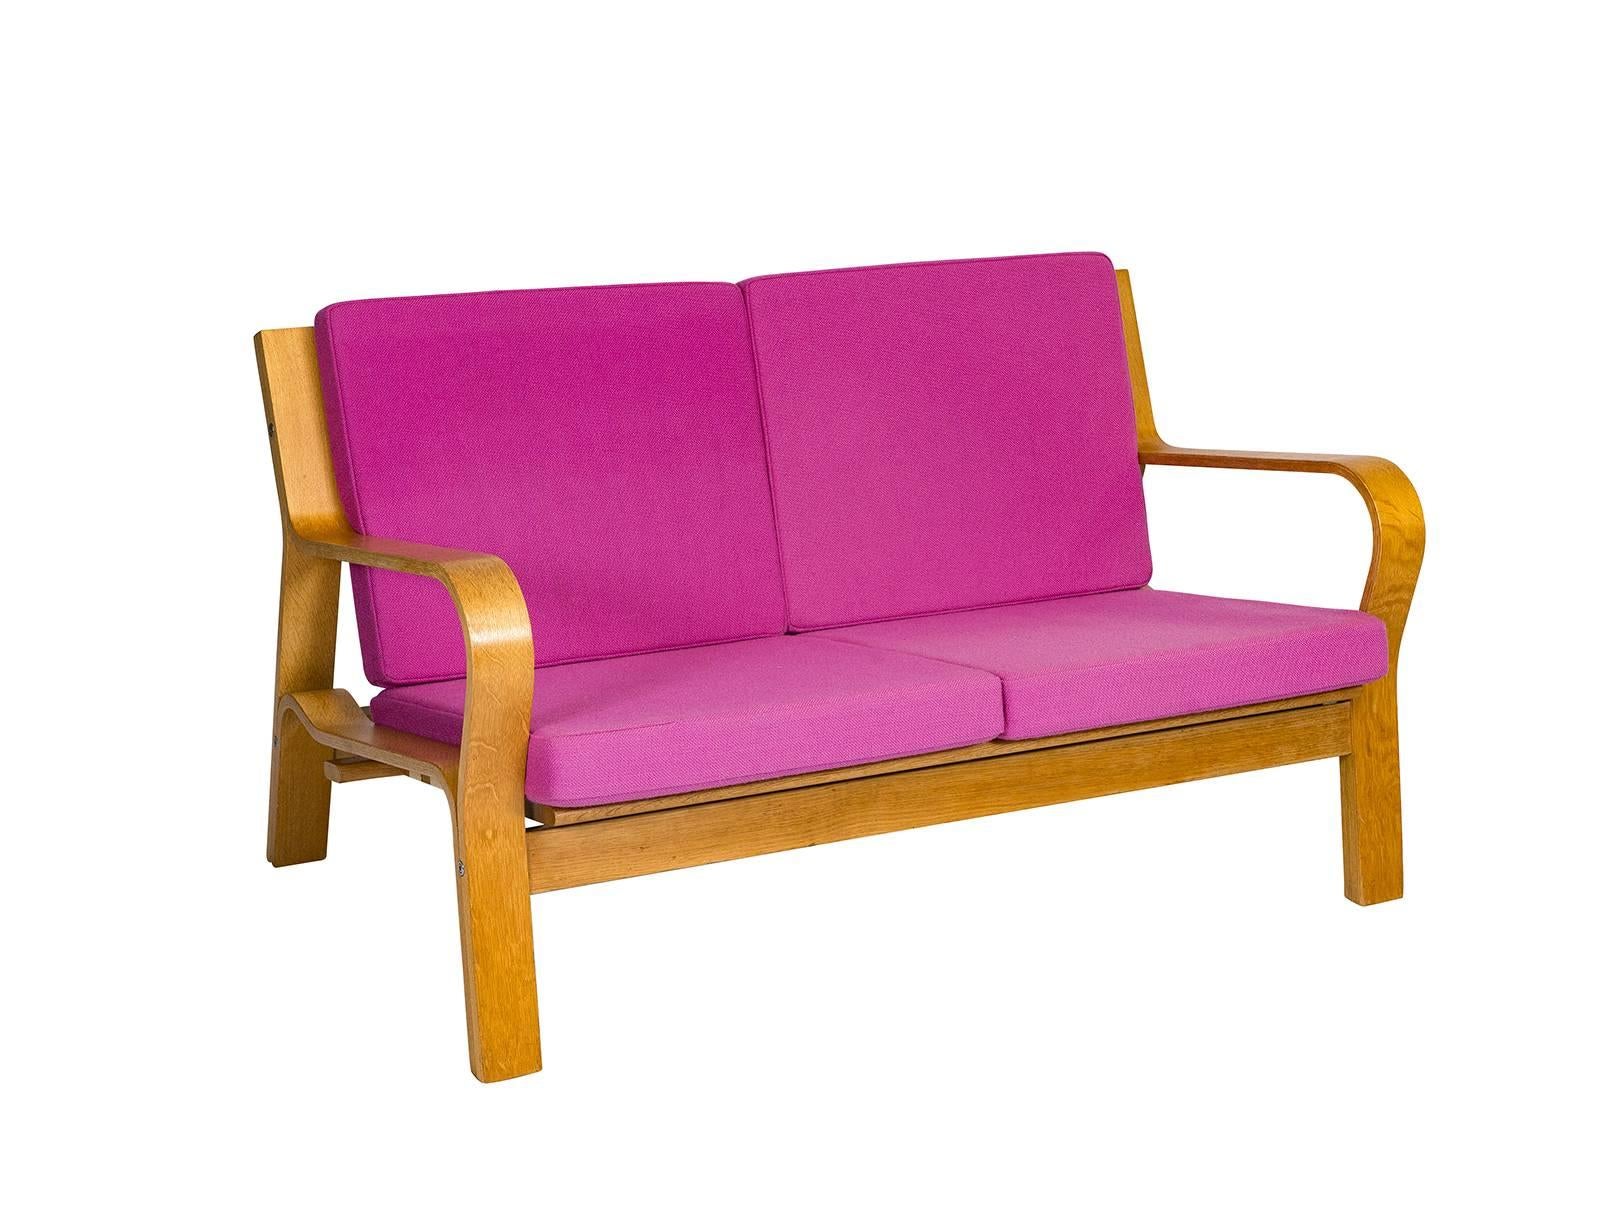 Hans Wegner GE-670 settee designed in 1967 and produced by Getama. The back is woven flag line.    Store formerly known as ARTFUL DODGER INC